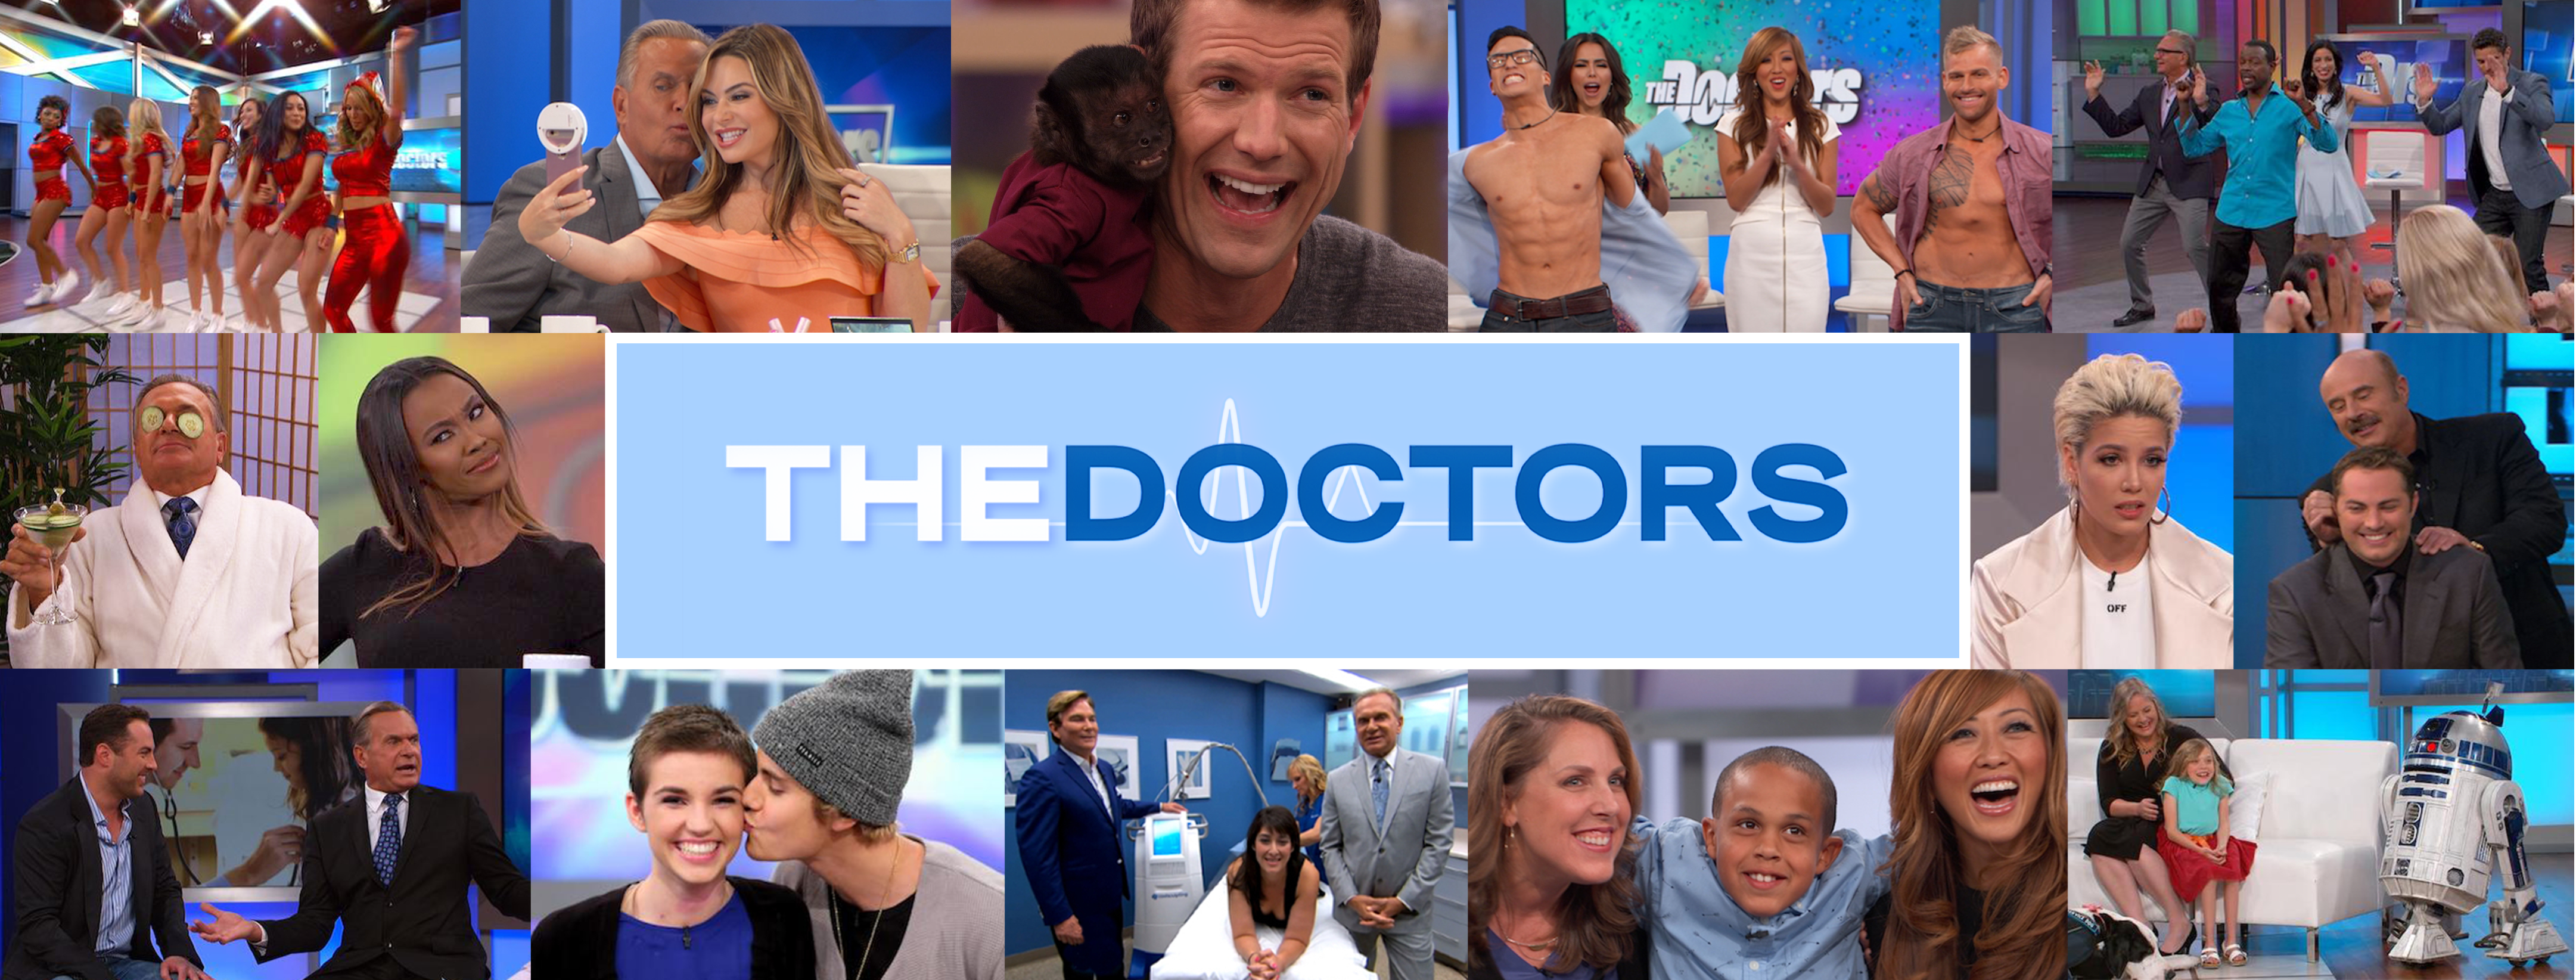 Bachelors For Dr Berman Supersize Your Sex Life The Doctors Tv Show